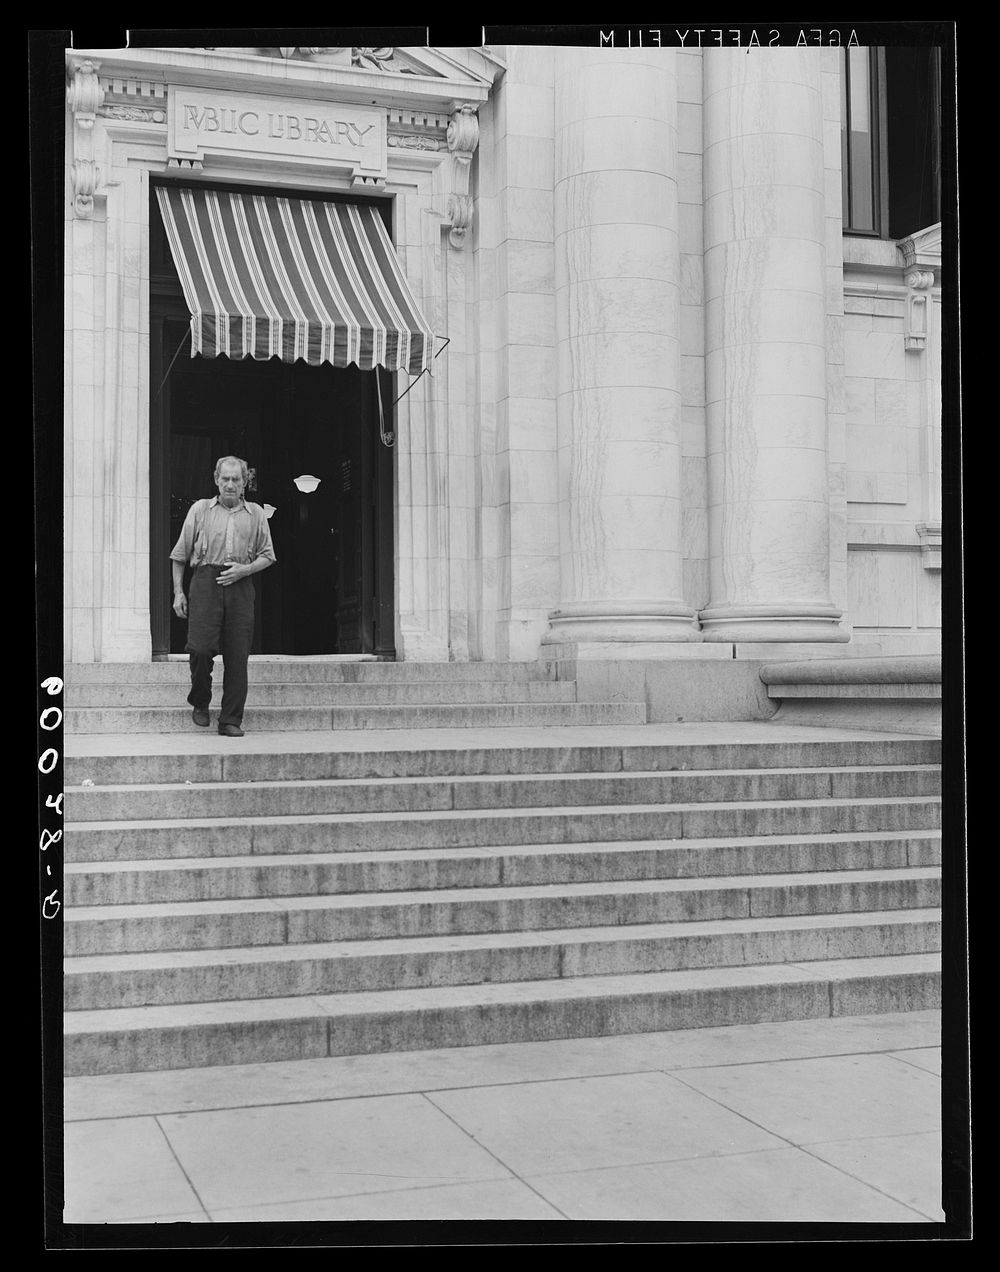 Public library. Washington, D.C.. Sourced from the Library of Congress.